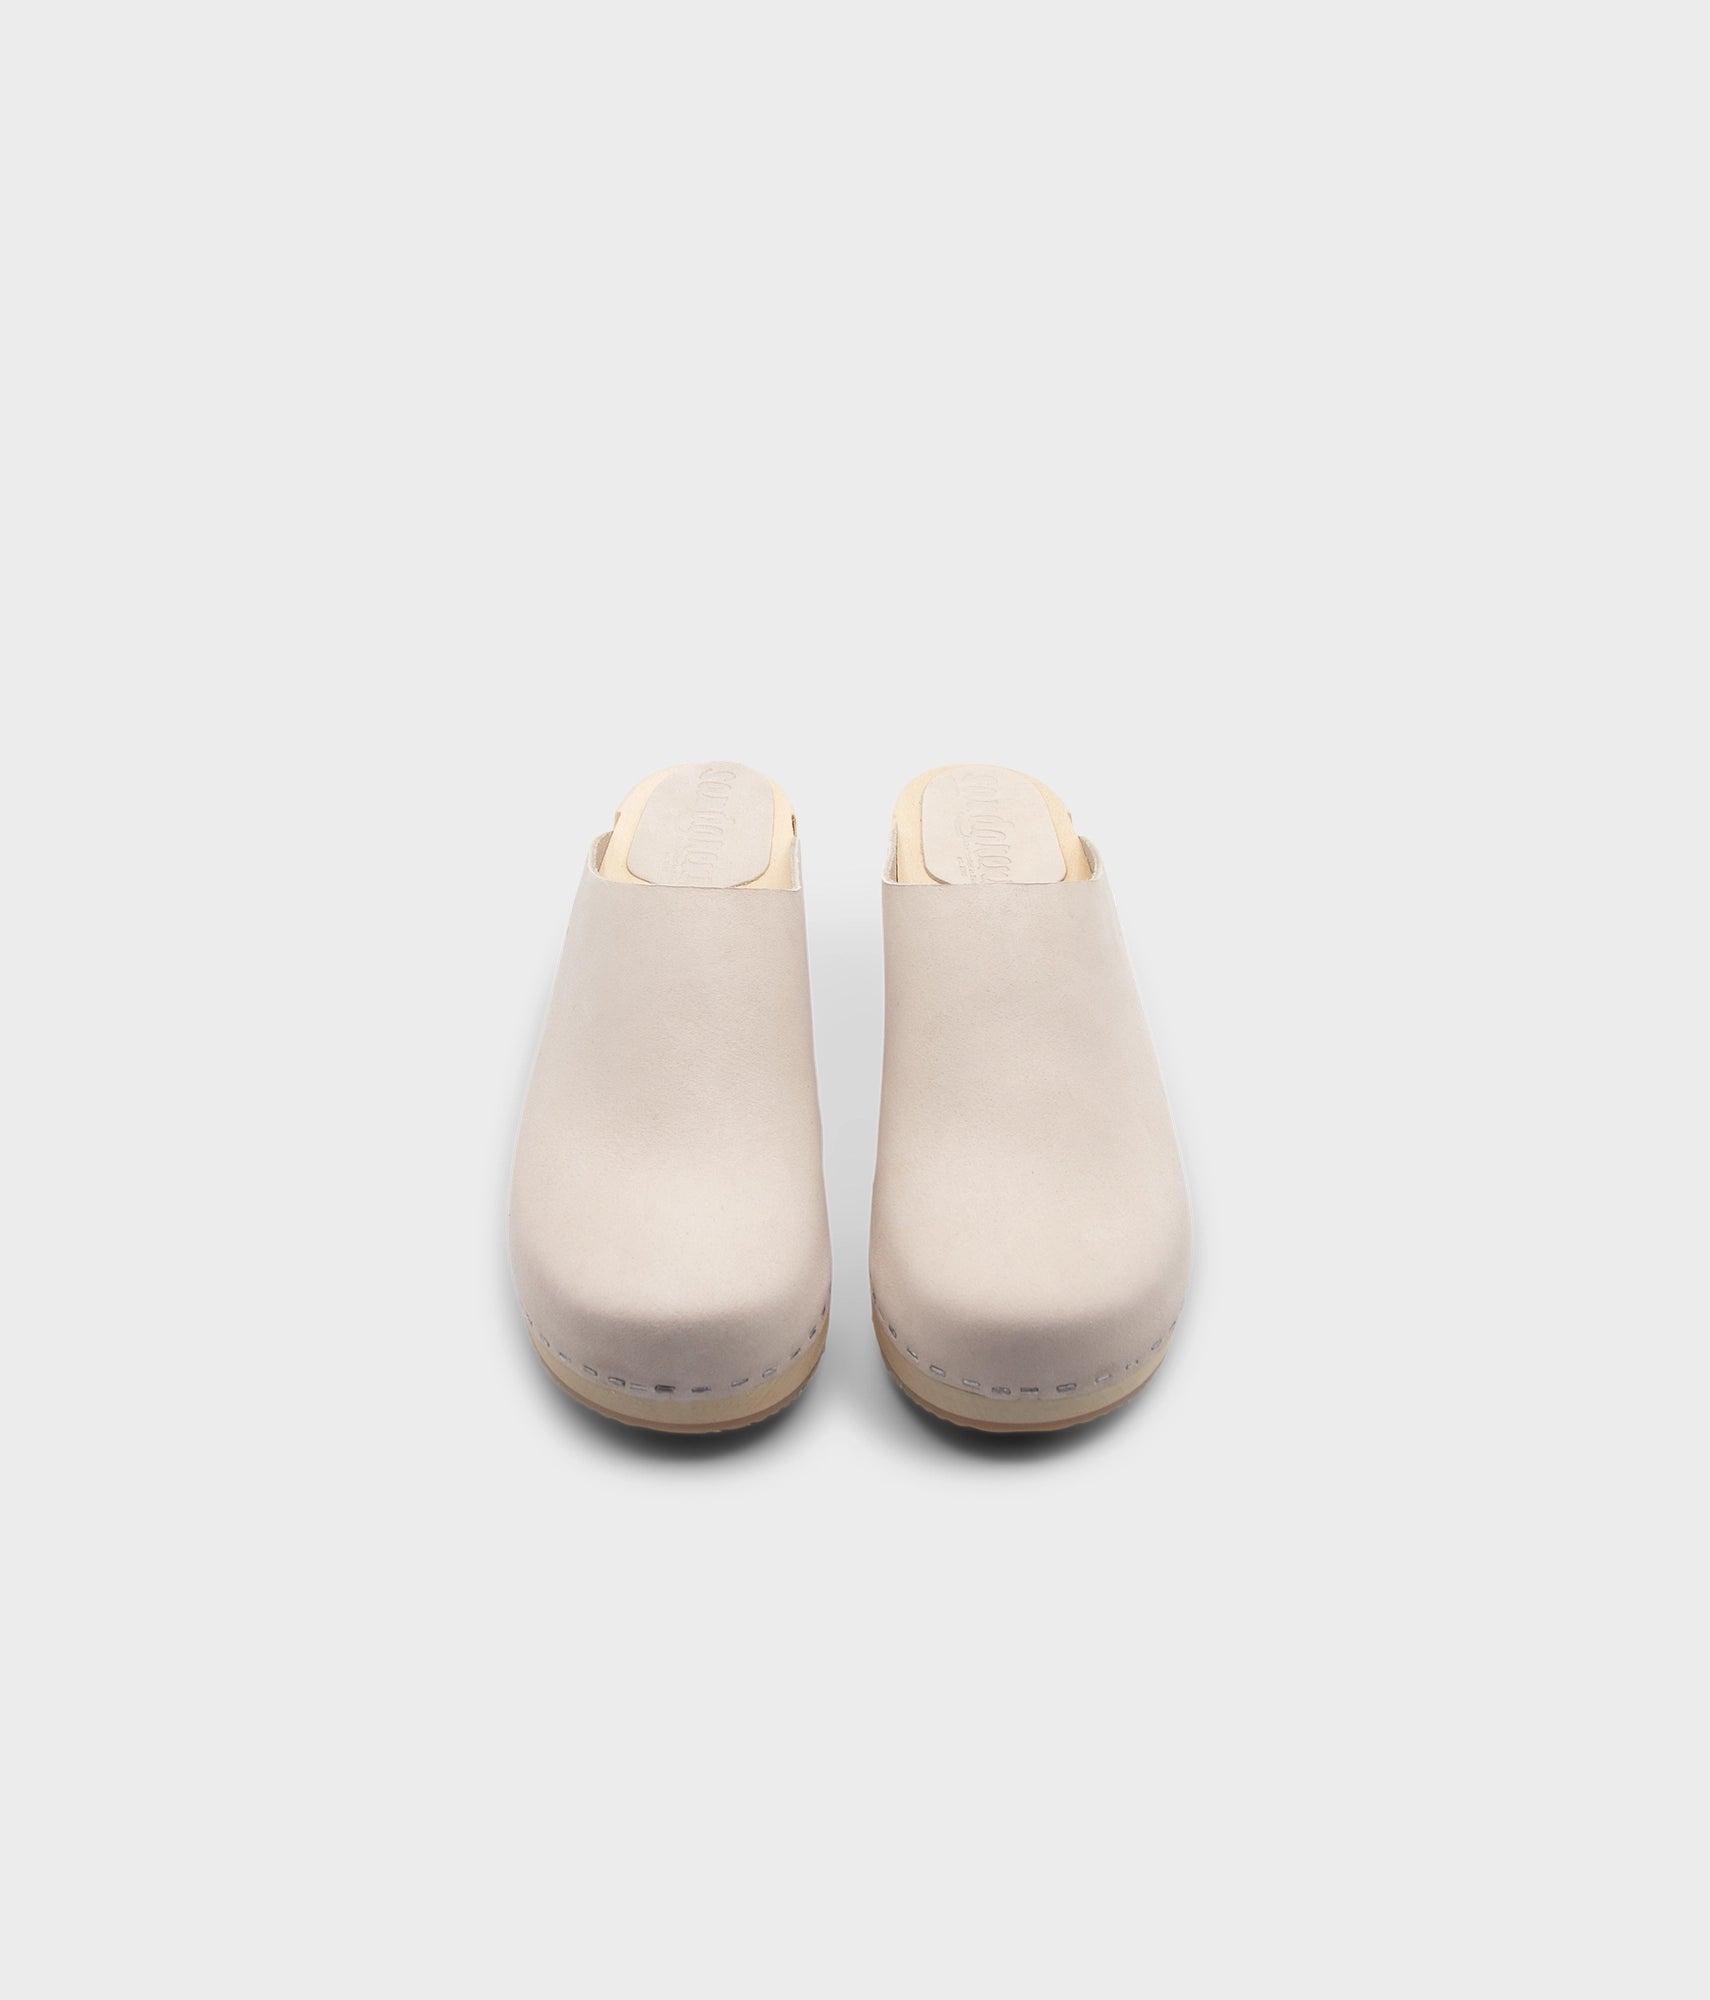 low heeled minimalistic clog mules in sand white nubuck leather stapled on a light wooden base